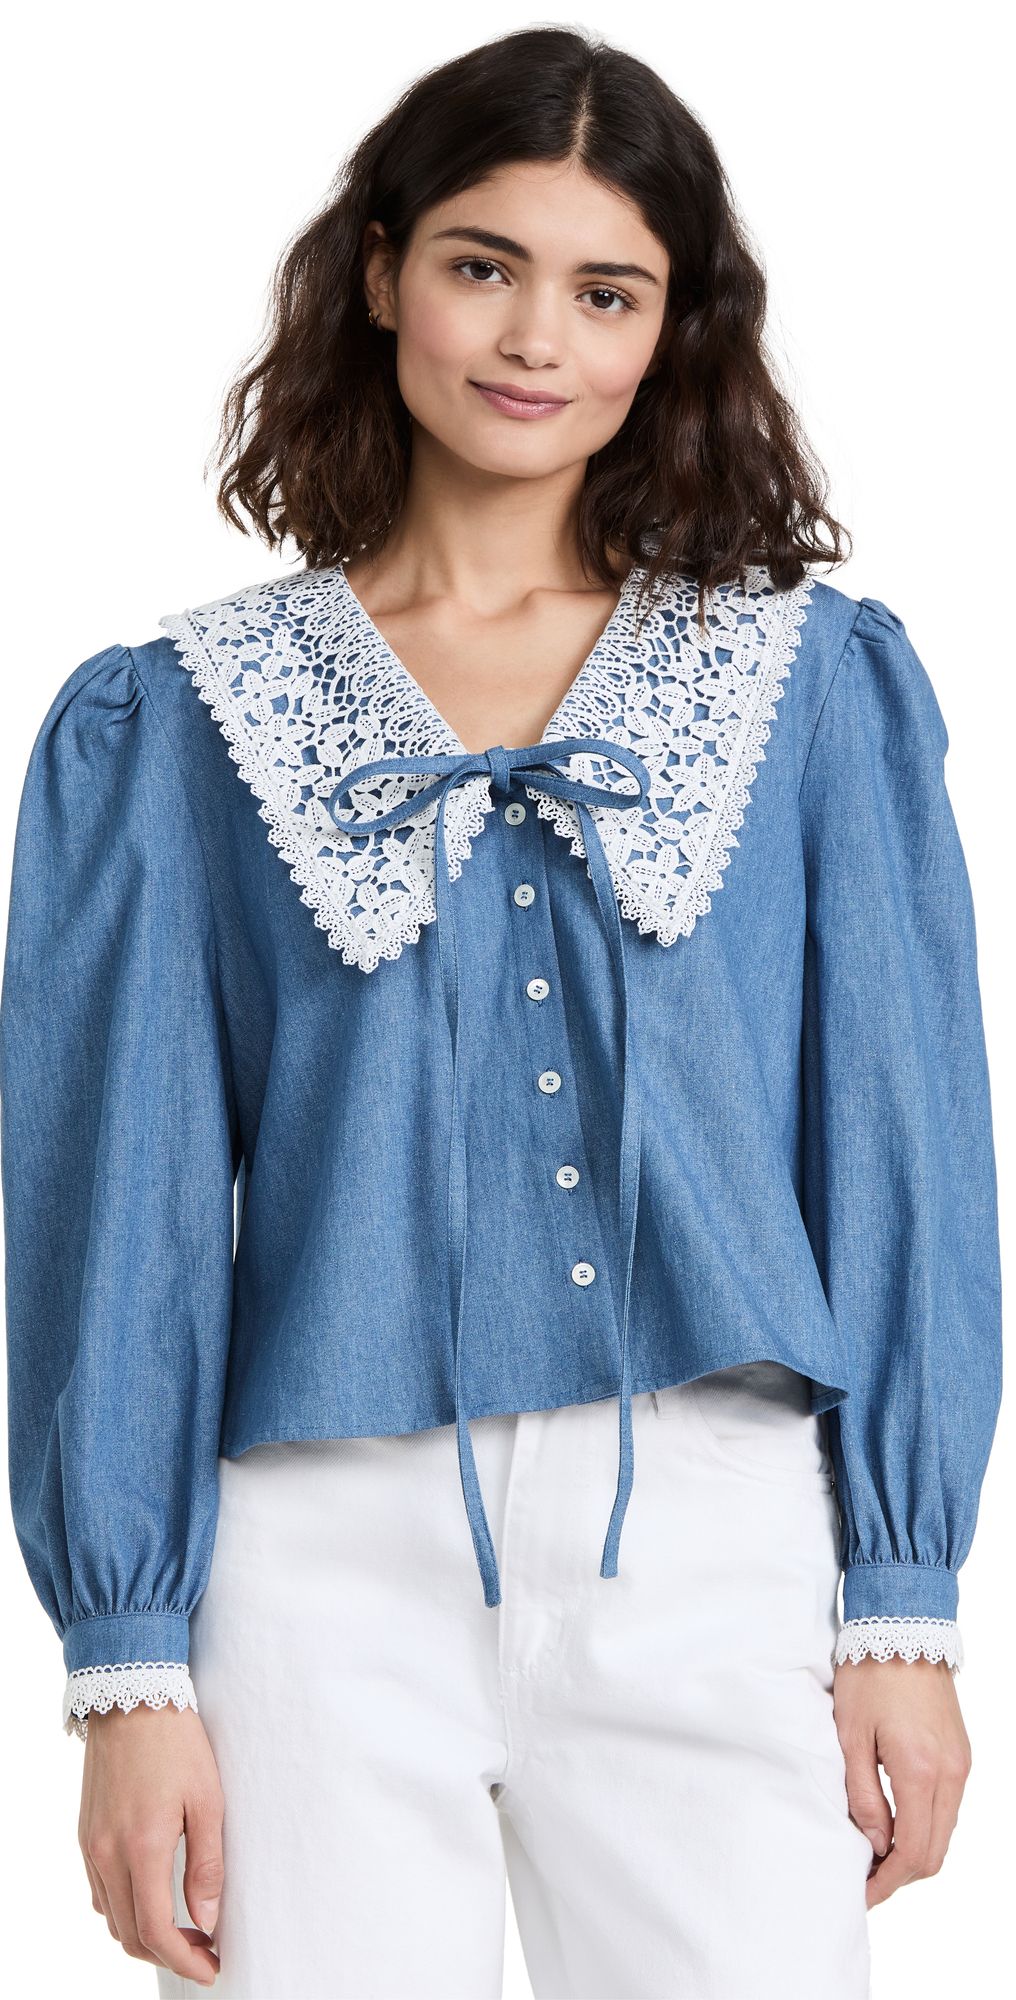 Shirt with Lace Collar | Shopbop